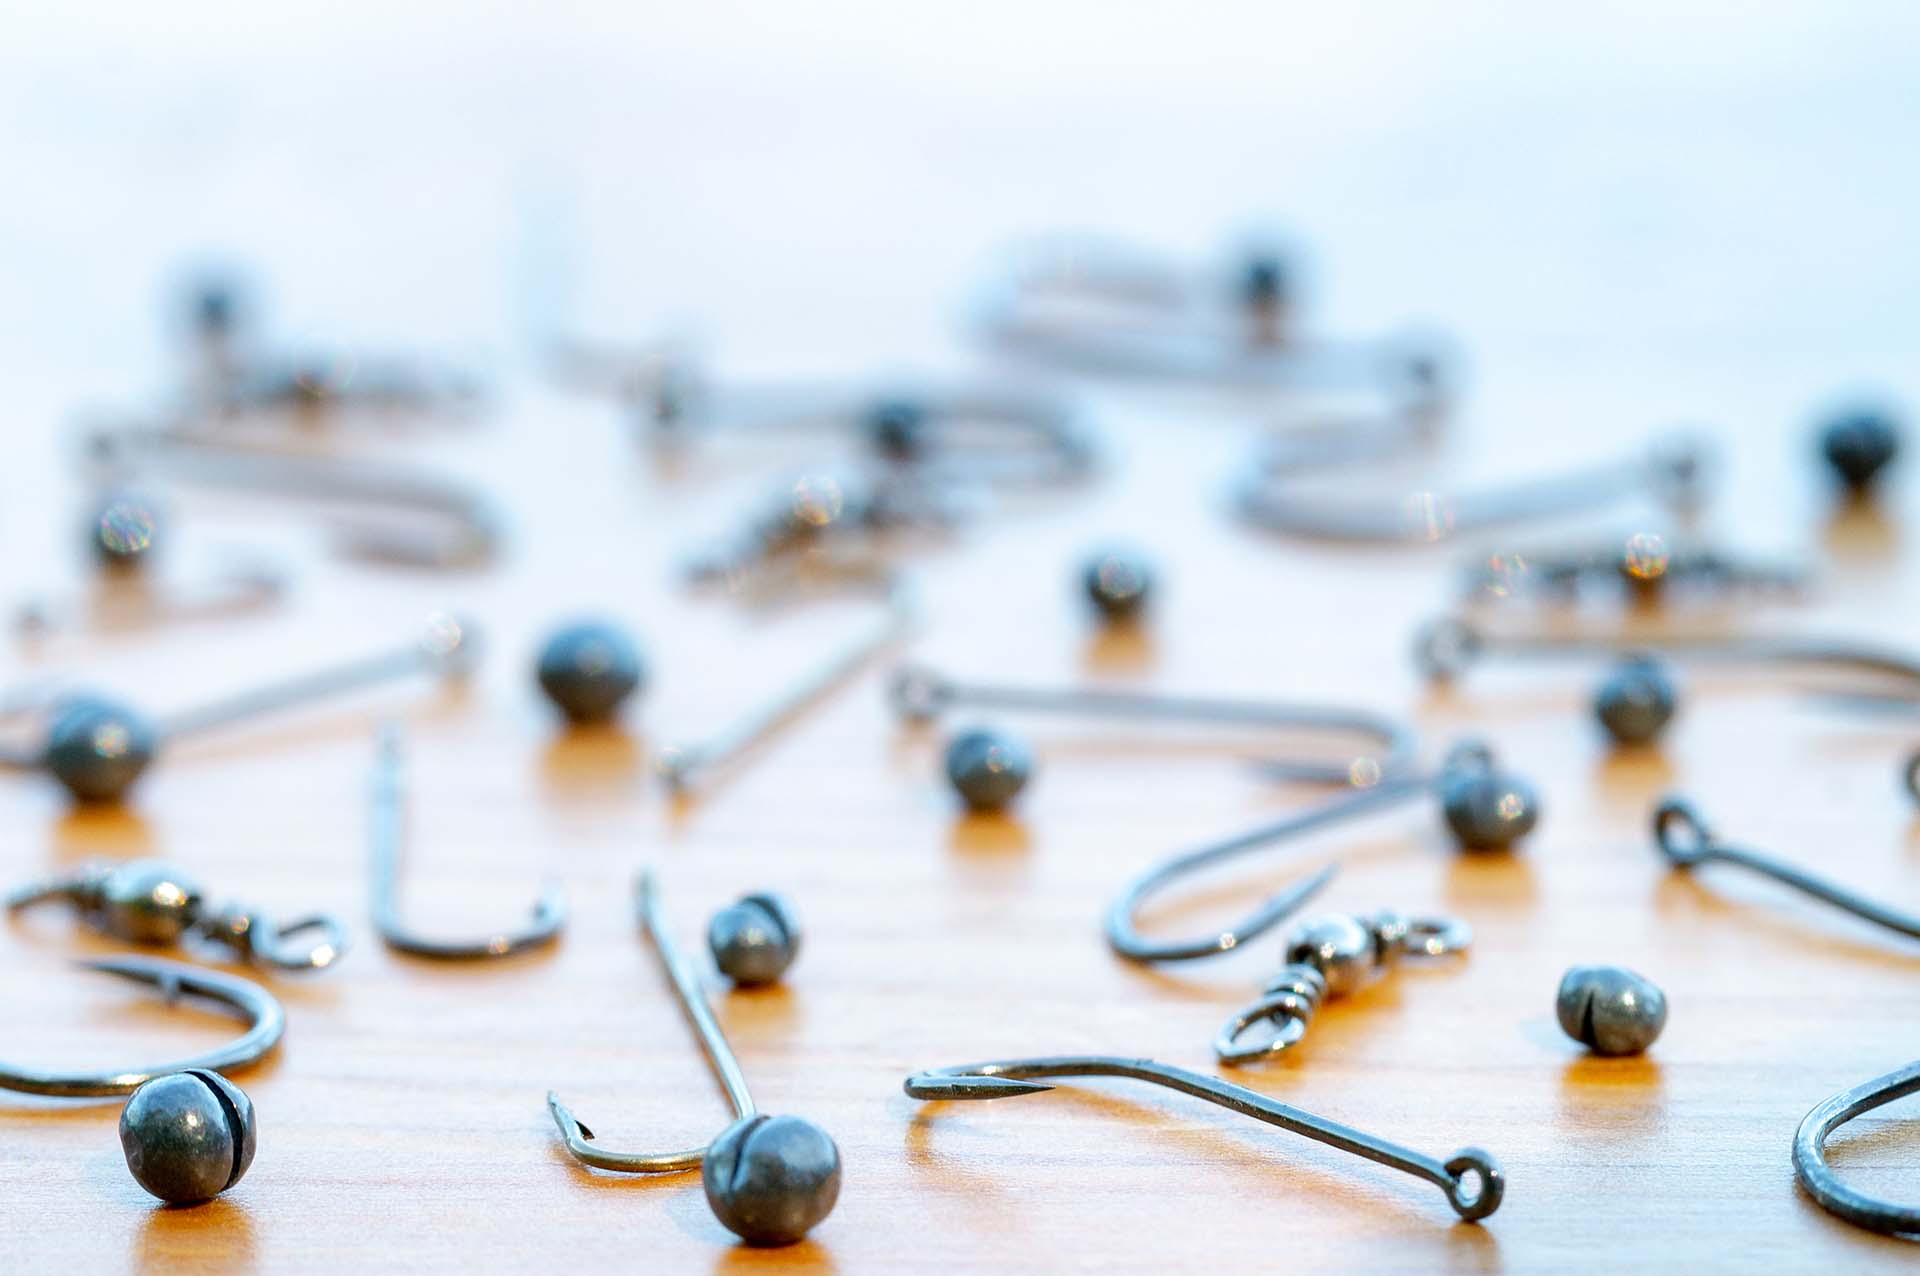 Various fishing hooks and sinkers on a table